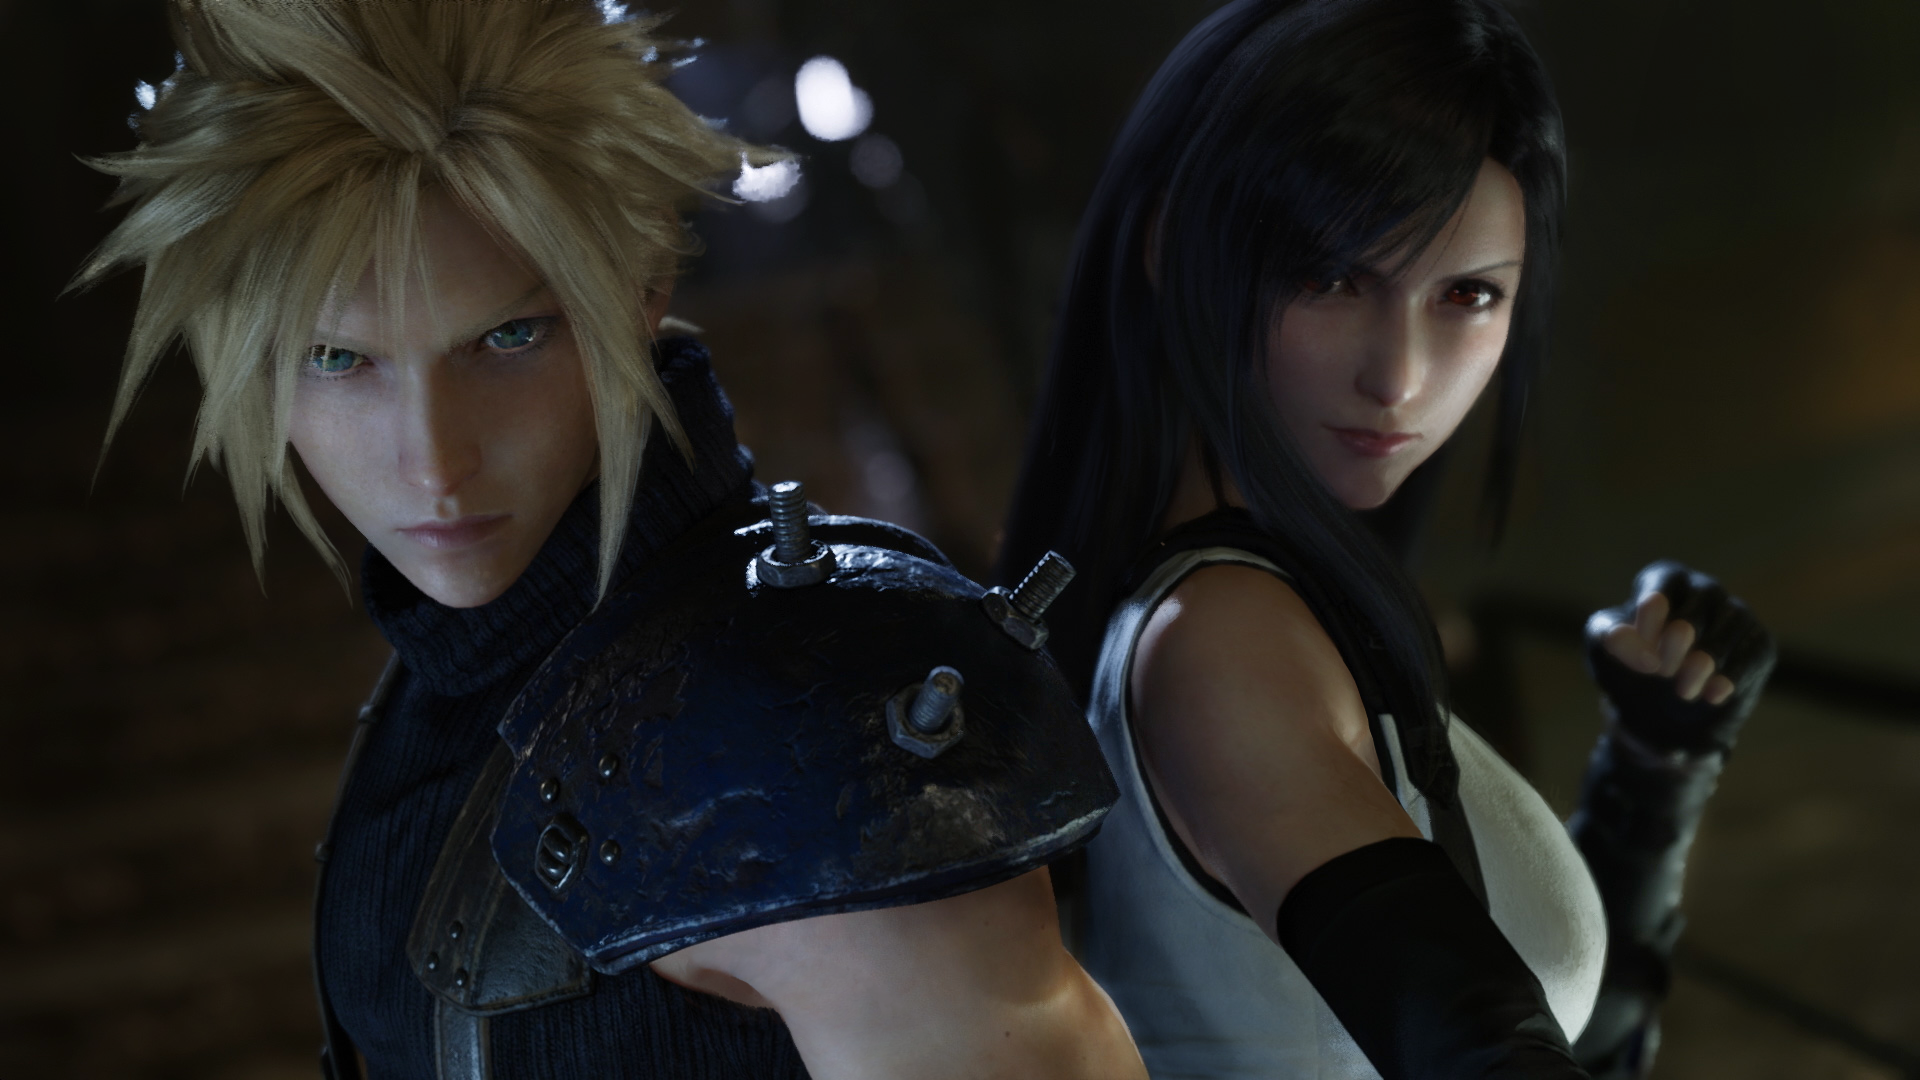 General 1920x1080 Cloud Strife Tifa Lockhart video games Final Fantasy VII: Remake Square Enix video game characters